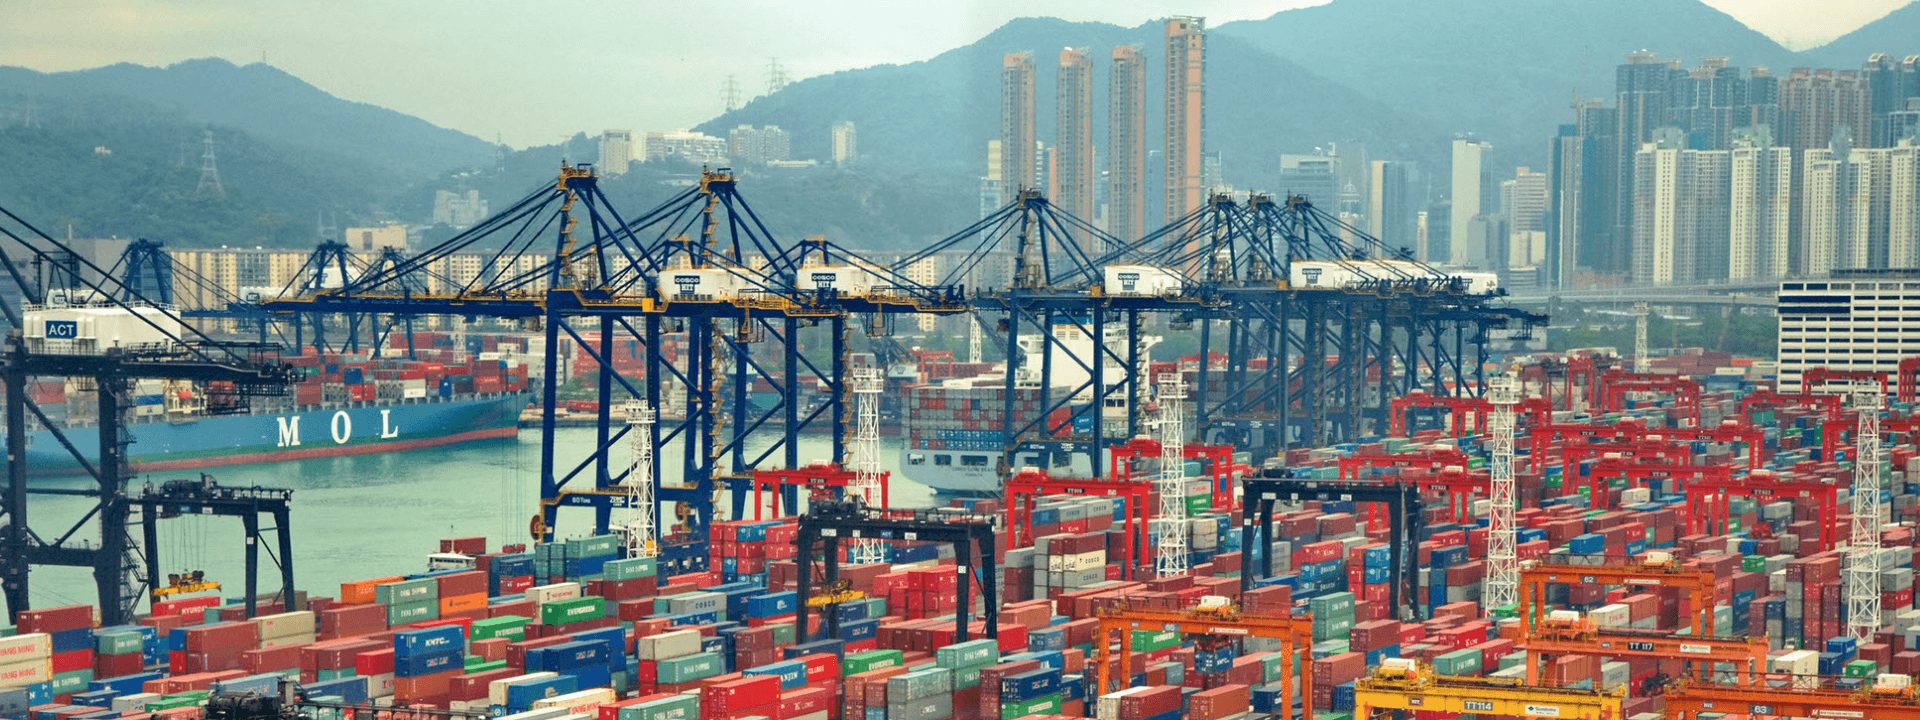 Opinion: Problems and Opportunities Emerge From Shifts in China’s Exports by Vincent Chan